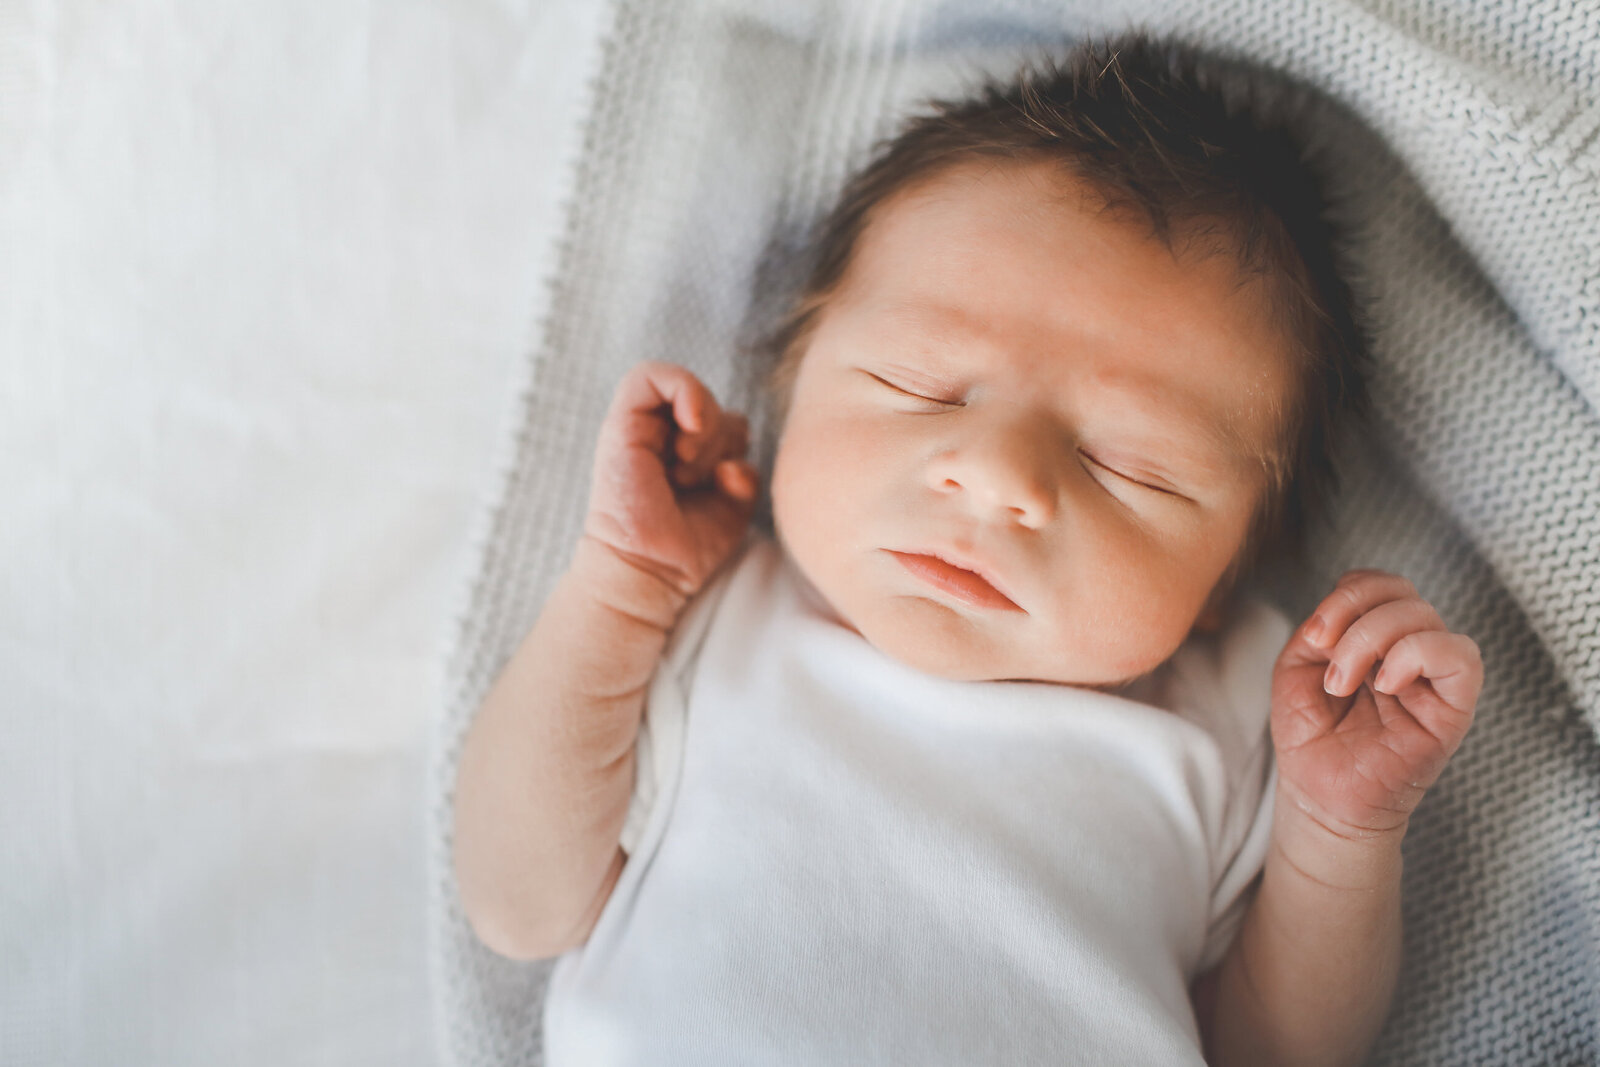 NBP-NEWBORN-BABY-WITH-LOTS-OF-HAIR-0018